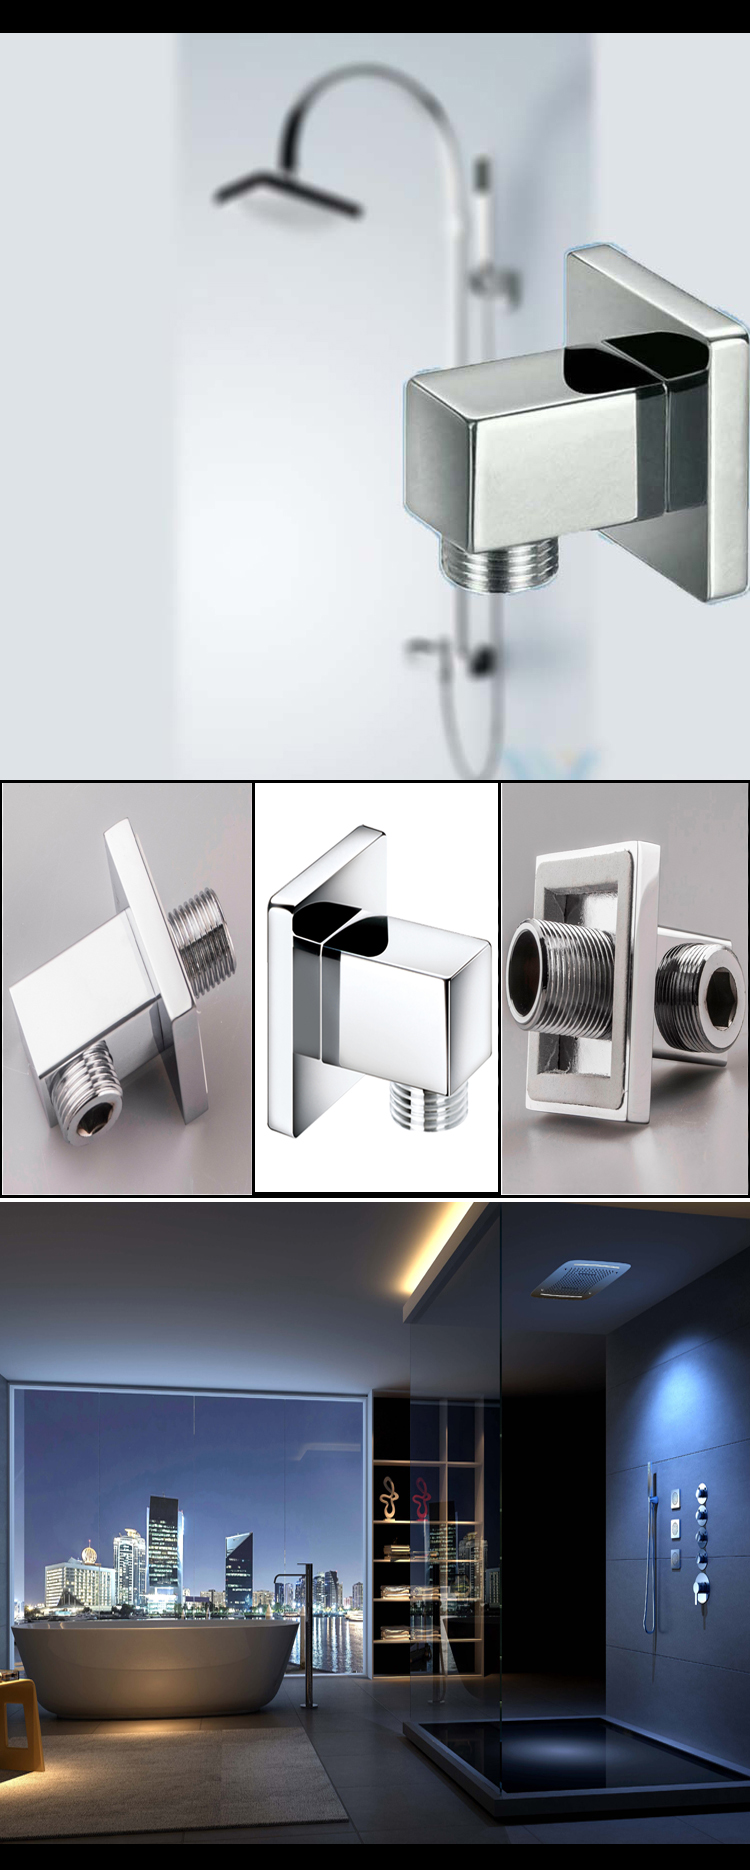 Different style different choice Square Wall union brass Elbow for concealed showers